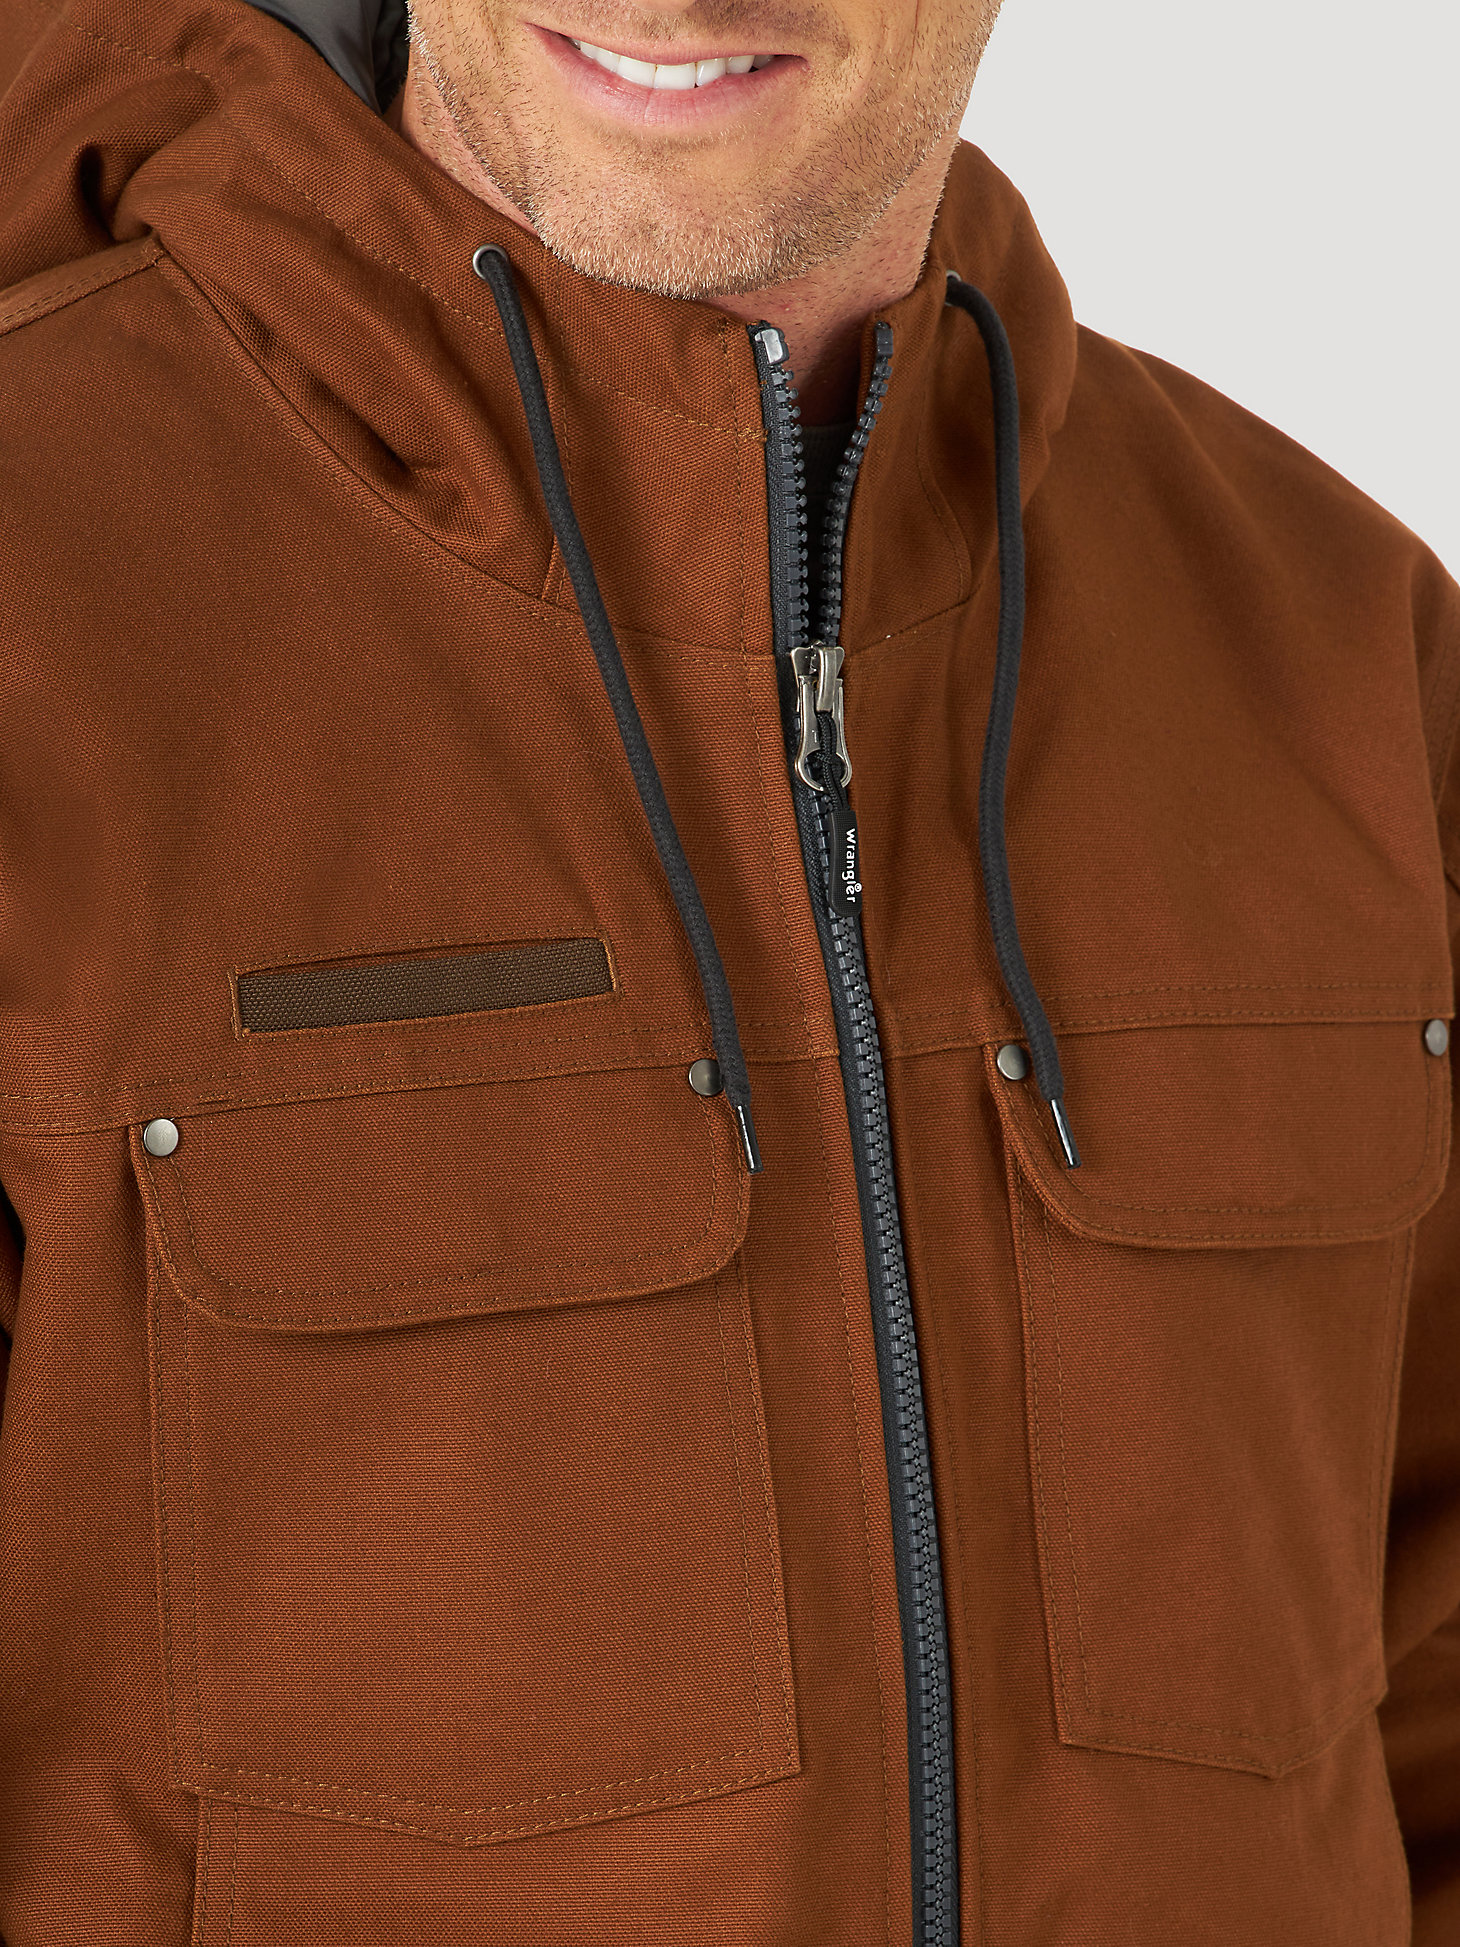 Wrangler® RIGGS Workwear® Tough Layers Insulated Canvas Work Jacket in Toffee alternative view 2